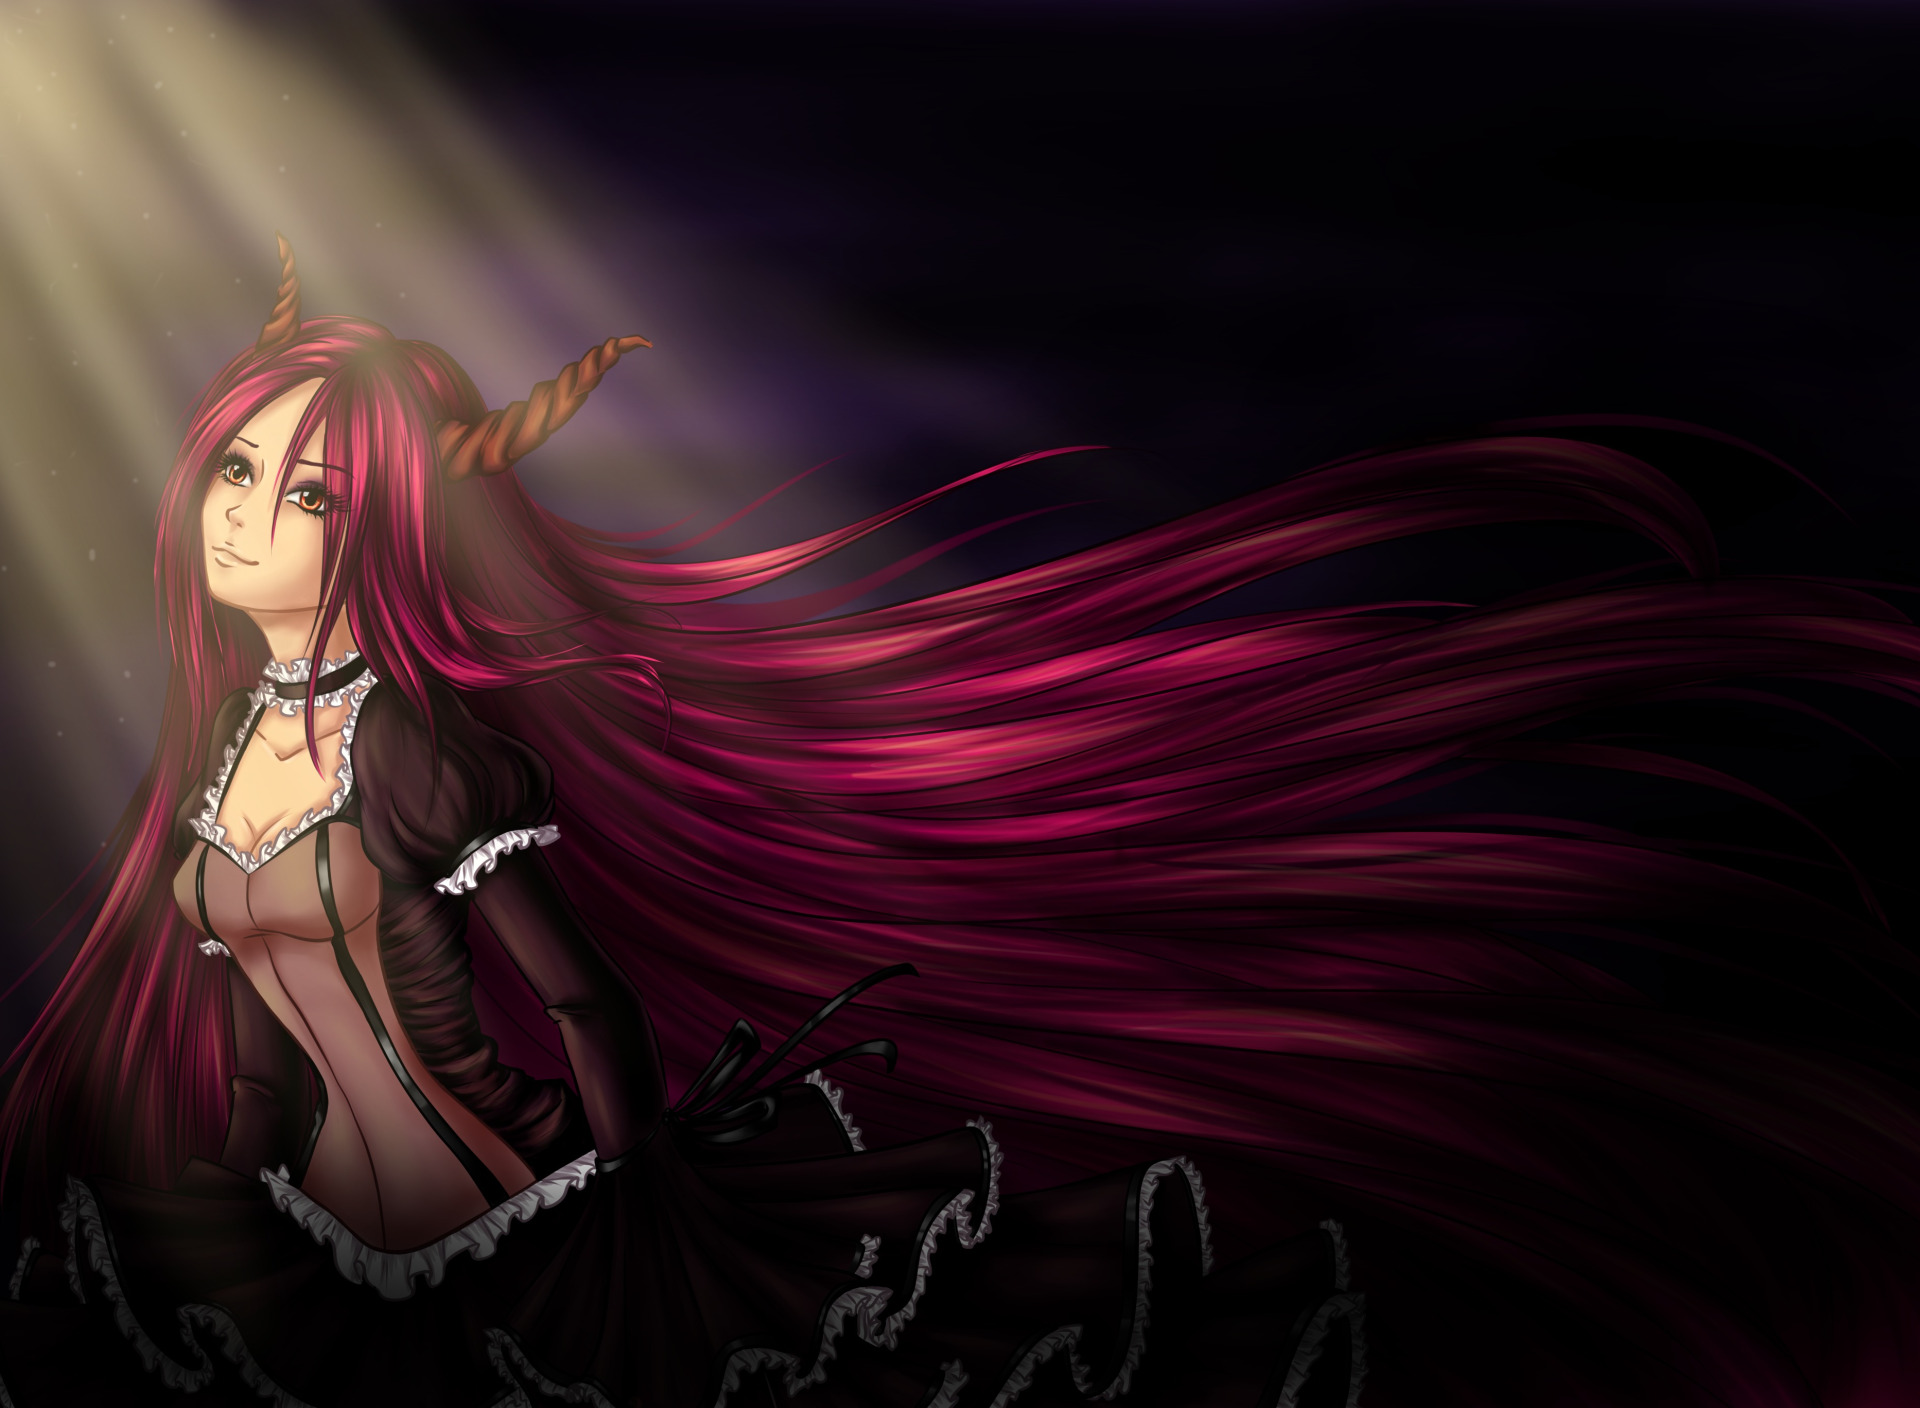 Download wallpaper look, girl, face, anime, dress, the demon, horns, black  background, red hair, section mood in resolution 1920x1408